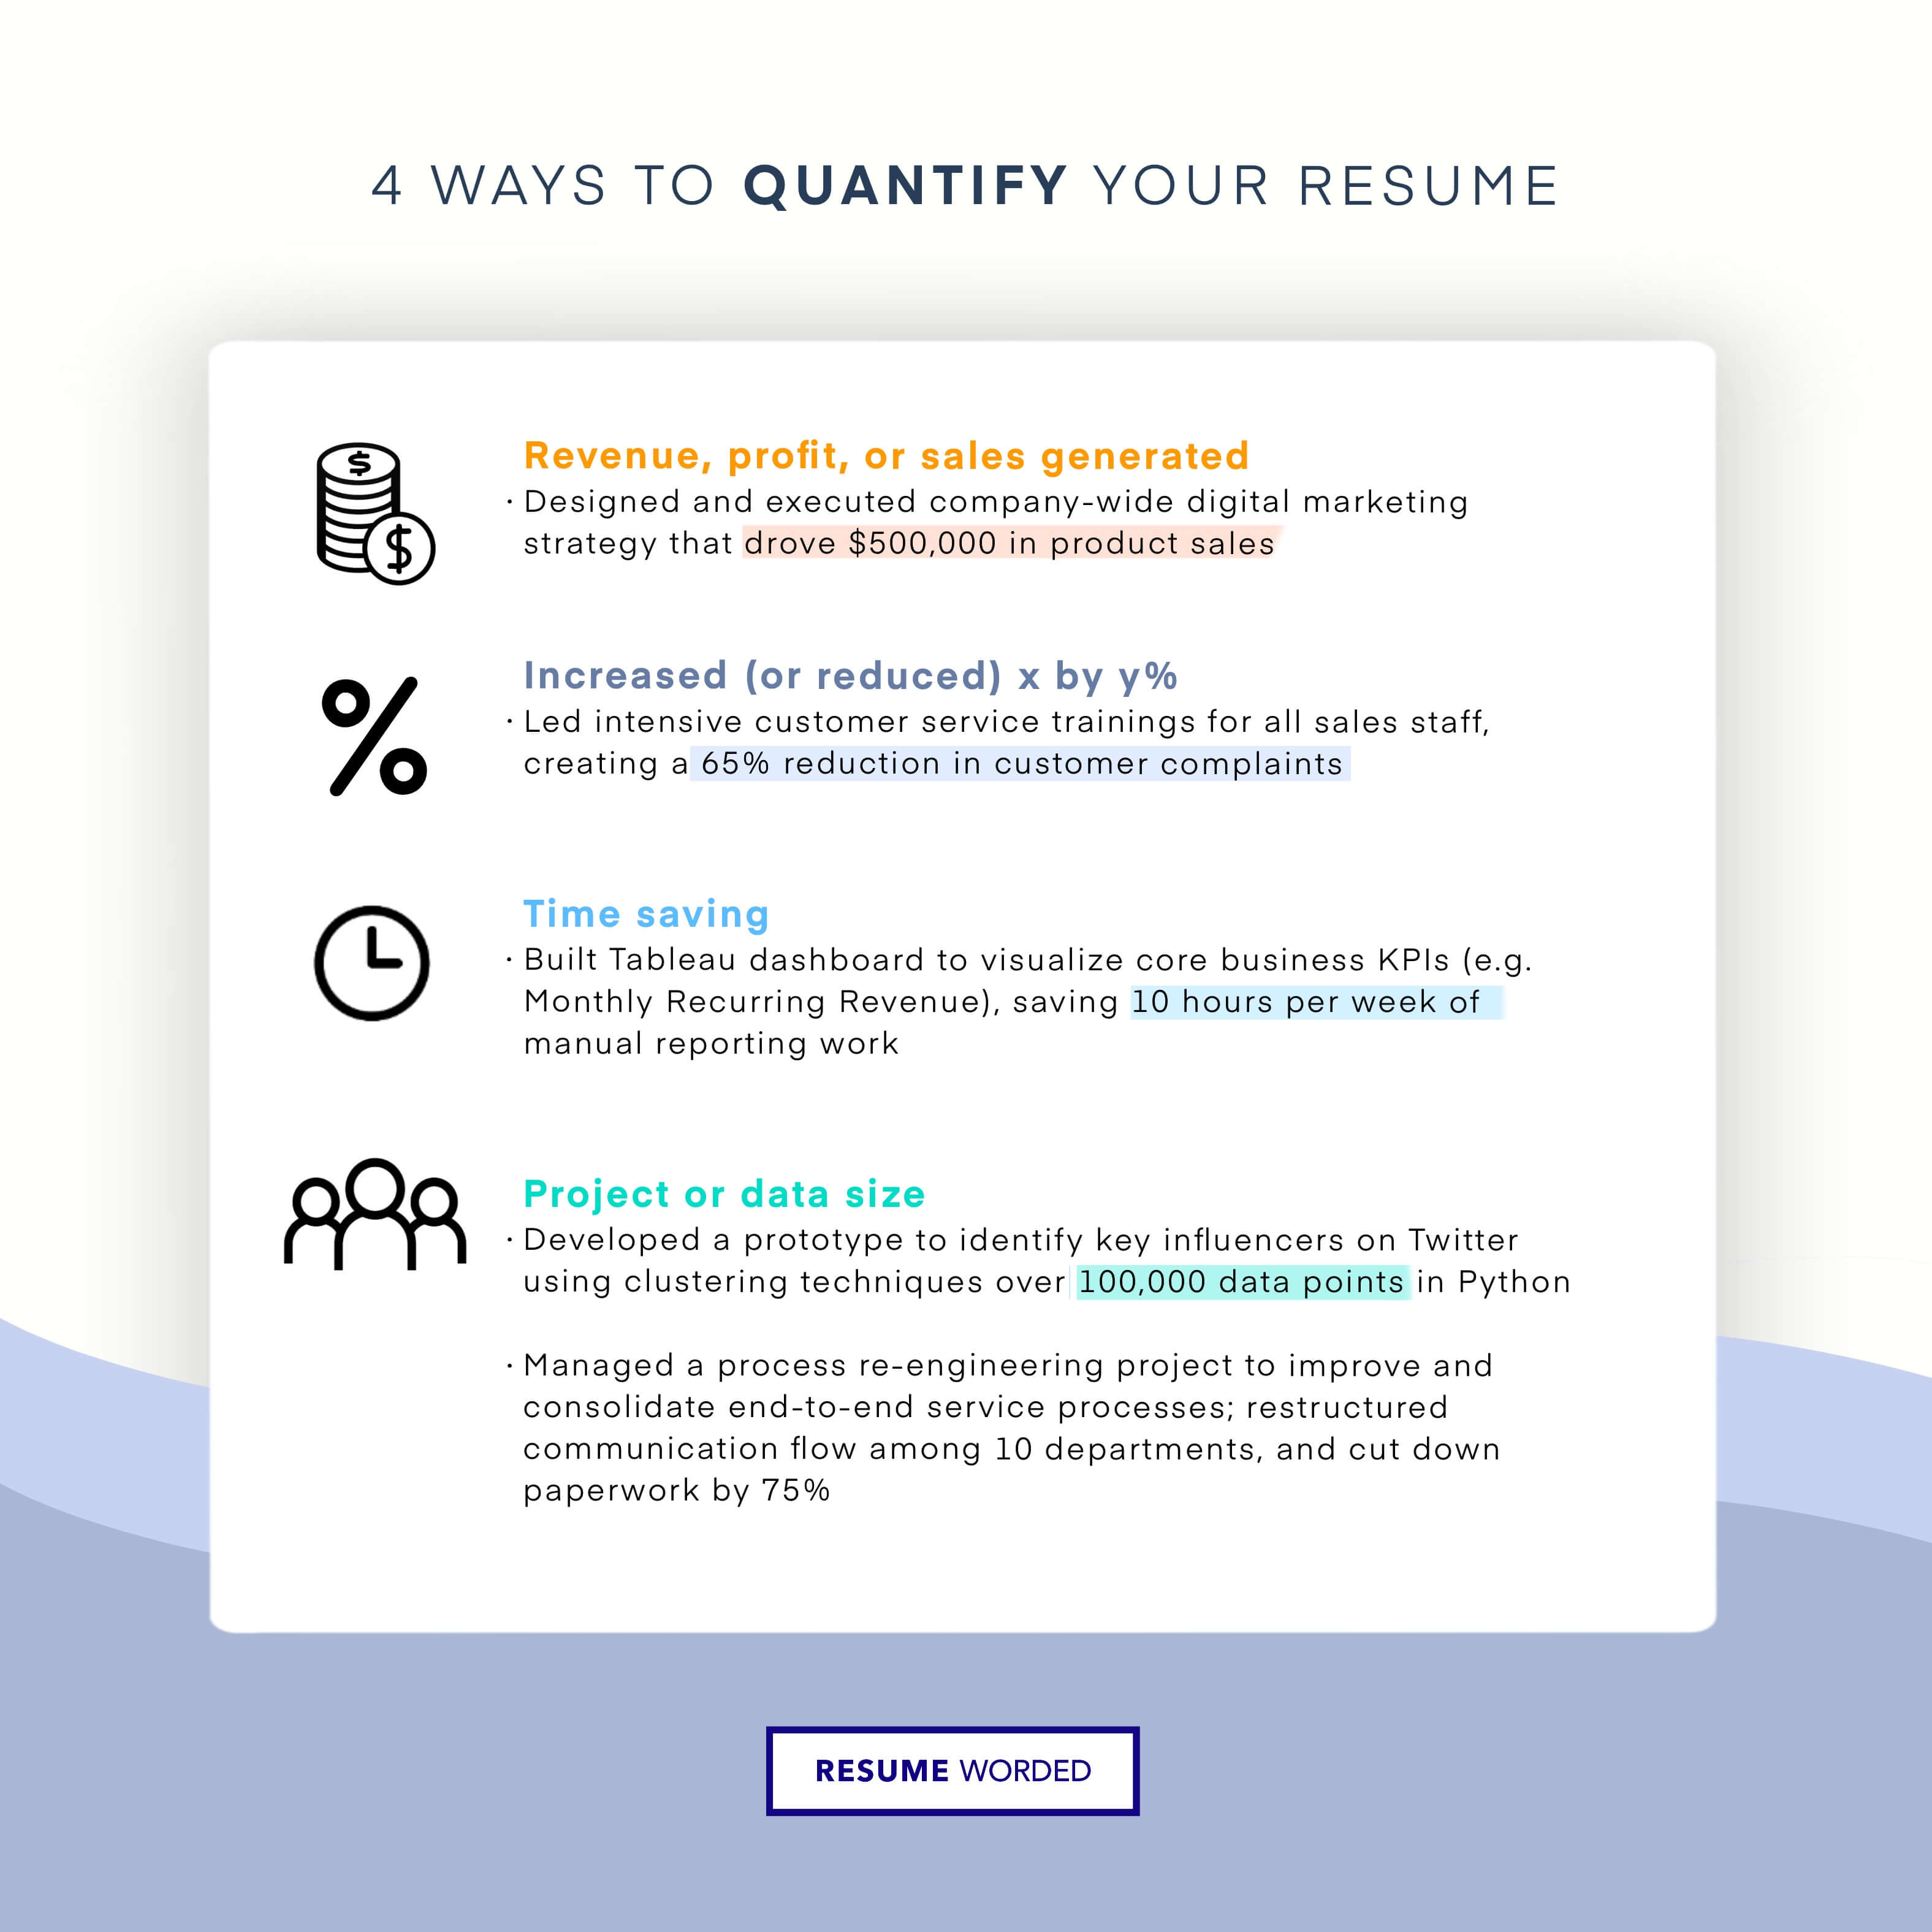 Quantify your accomplishments, even if you're just starting out - Entry-Level Business Development Manager Resume